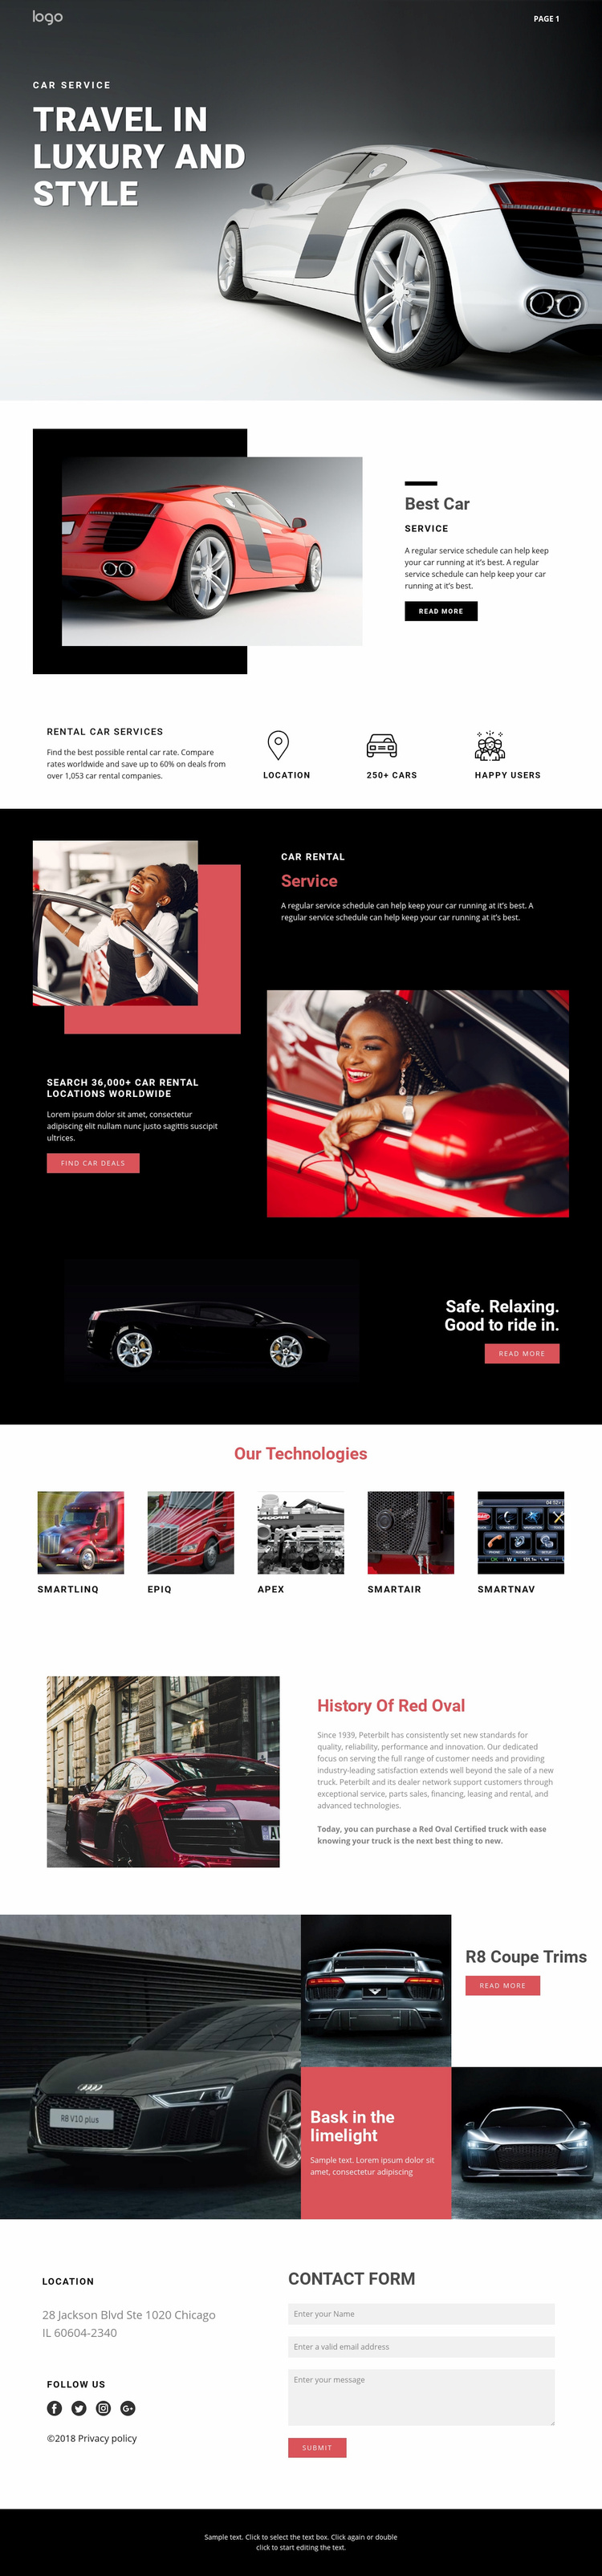 Traveling in luxury cars Wix Template Alternative